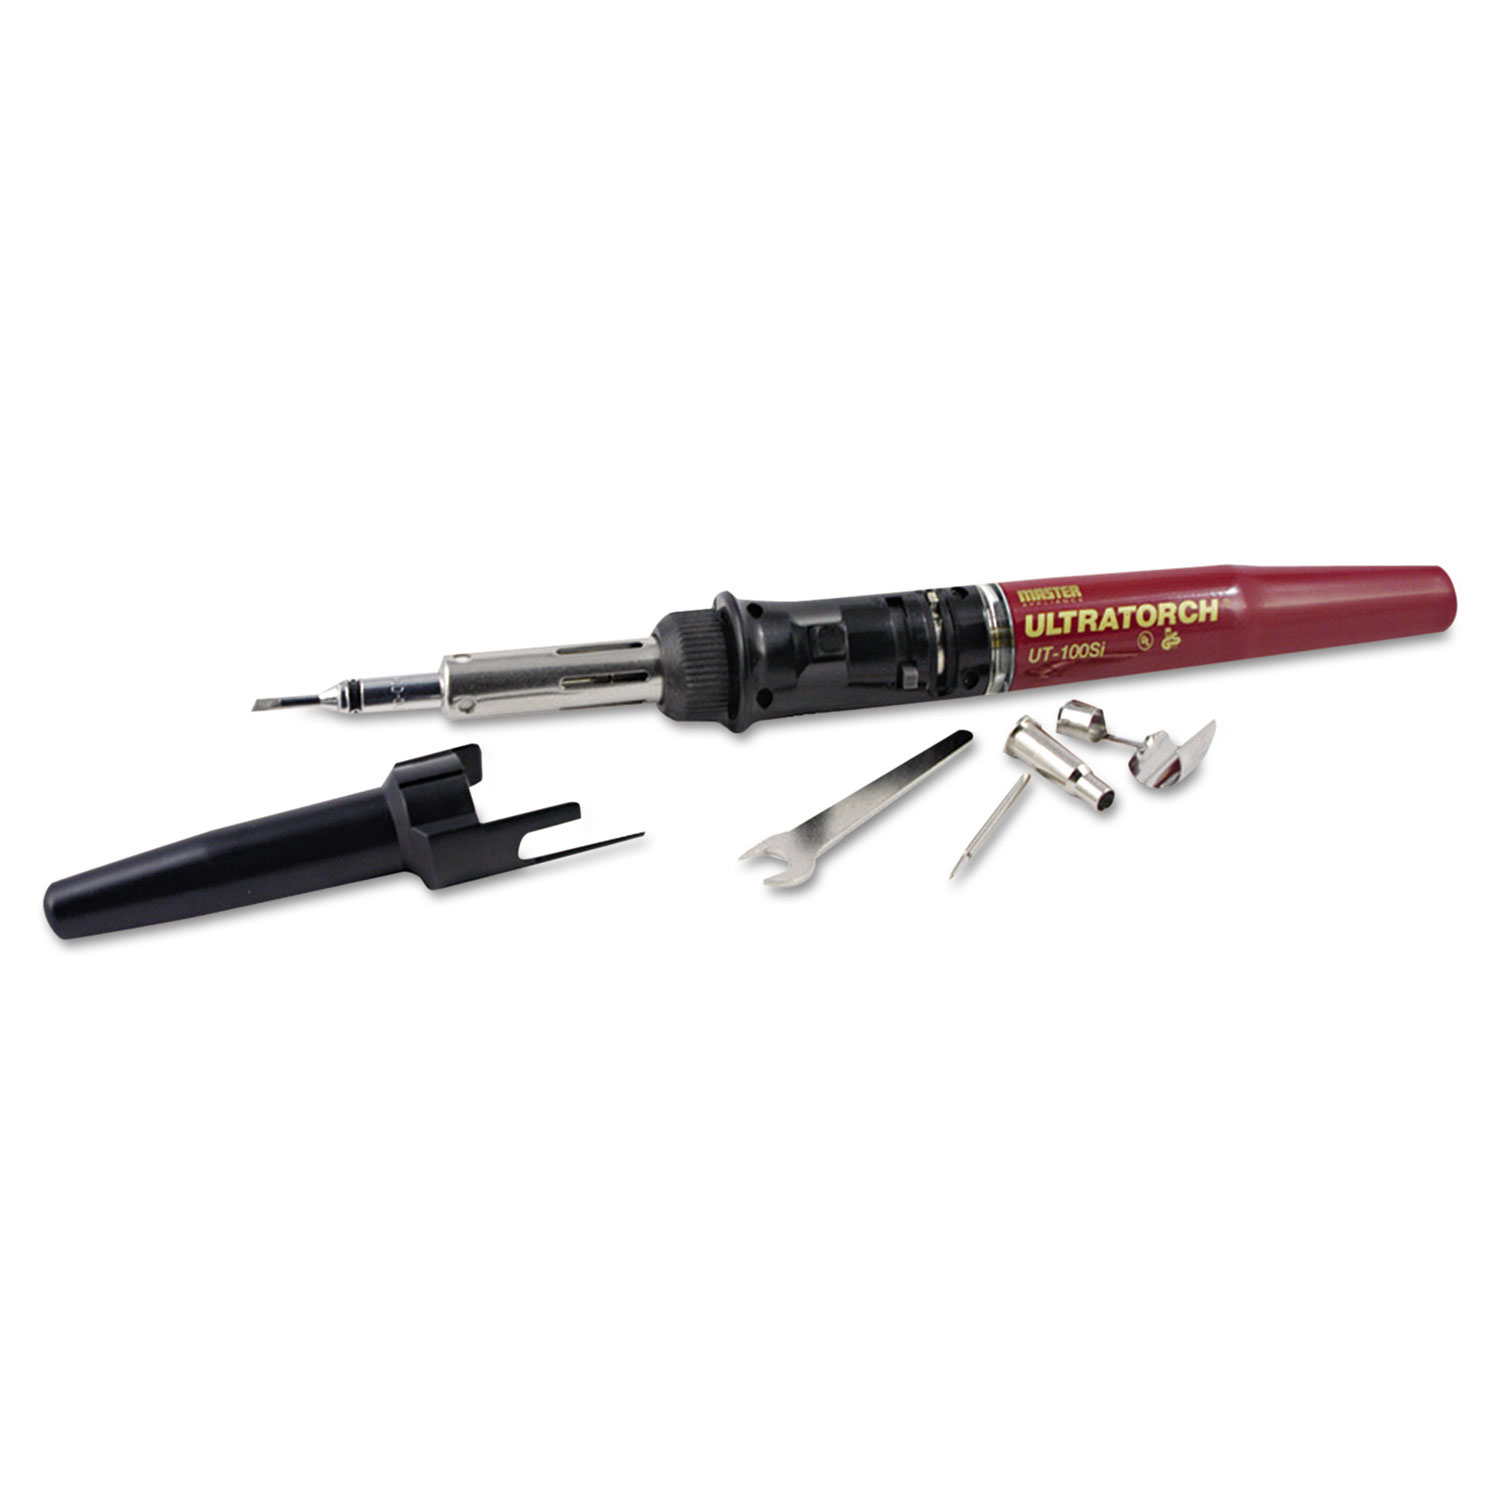 Ultratorch Soldering Iron & Flameless Heat Tool, Self-Igniting